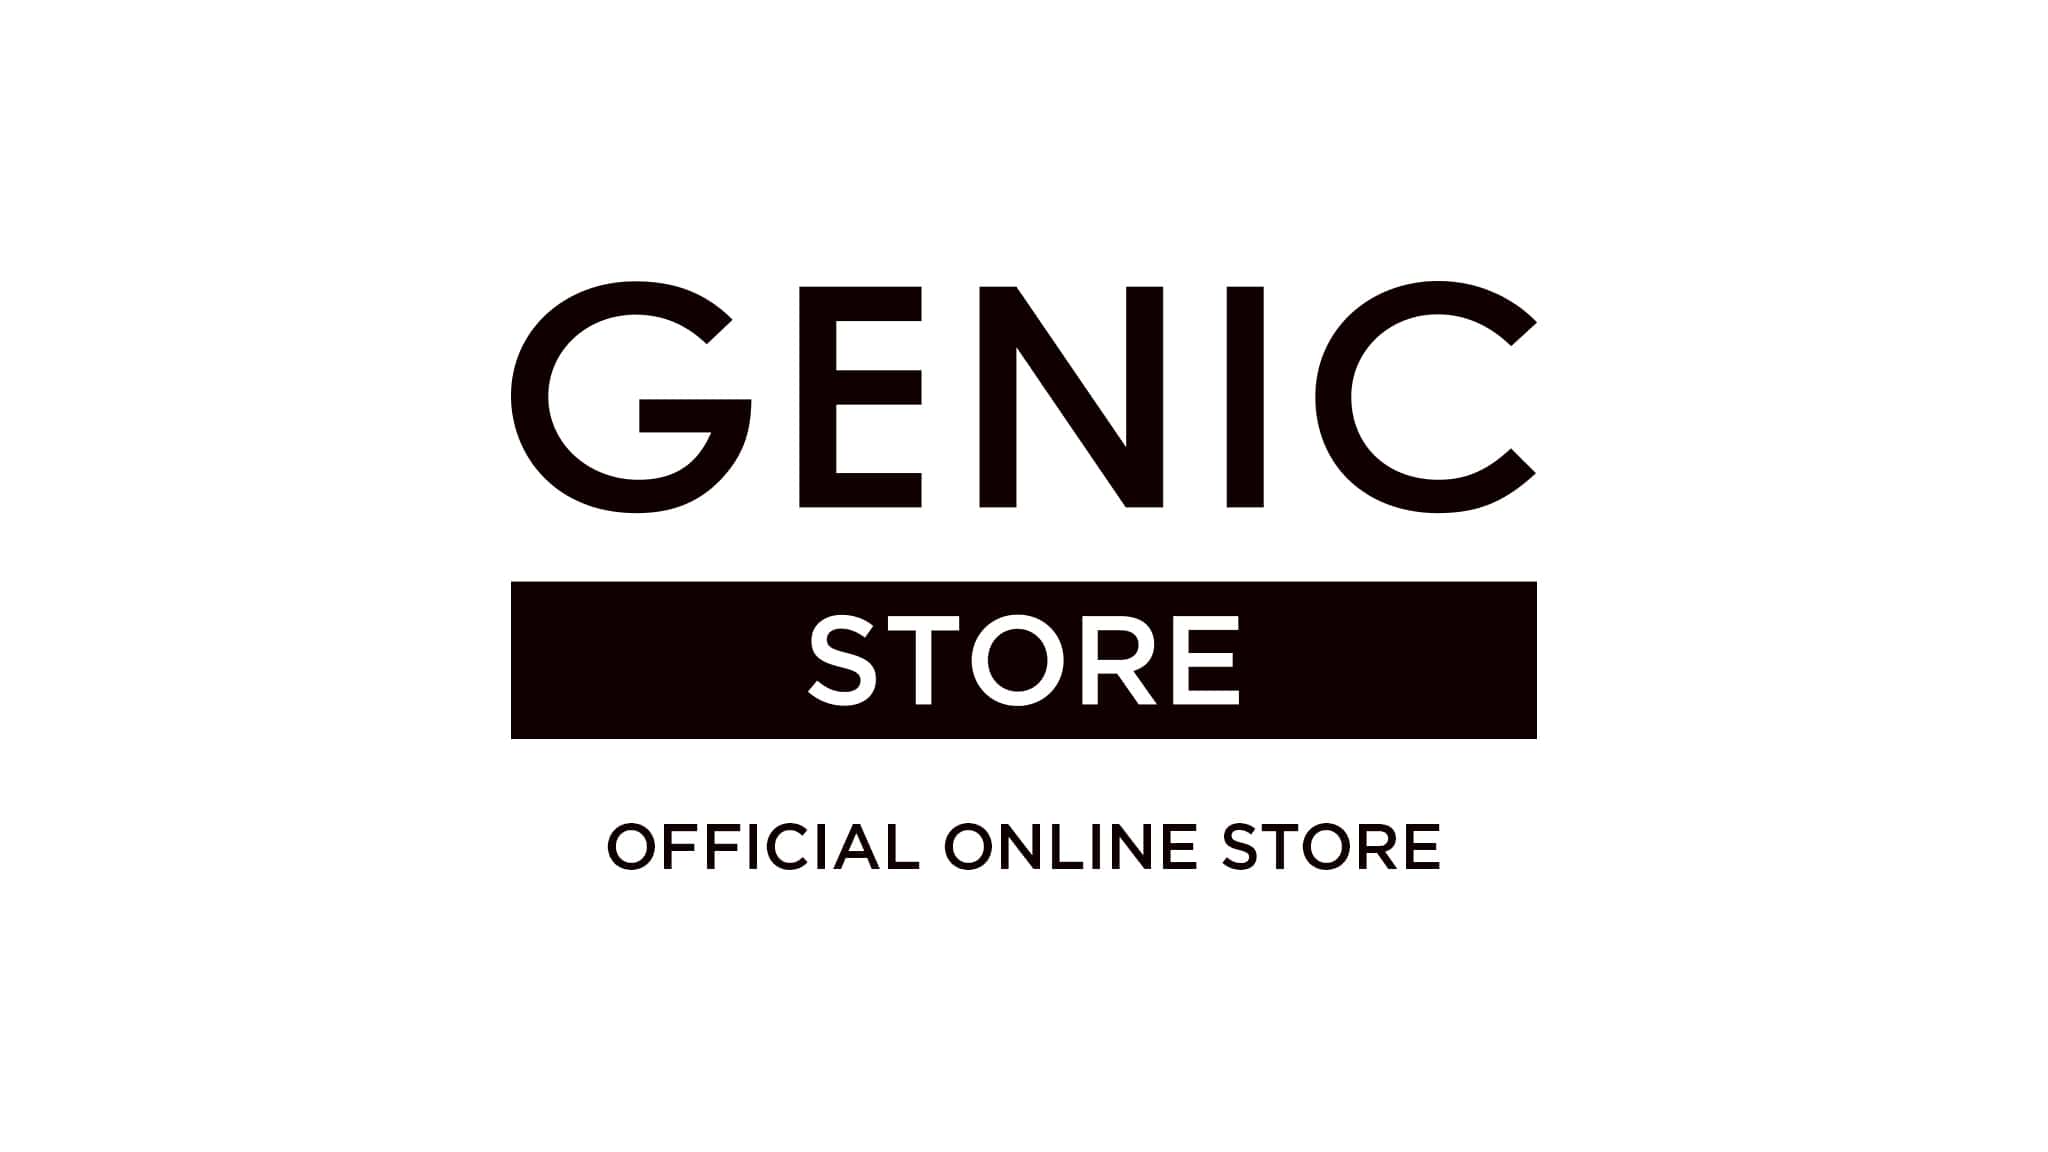 GENIC STORE OFFICIAL ONLINE STORE